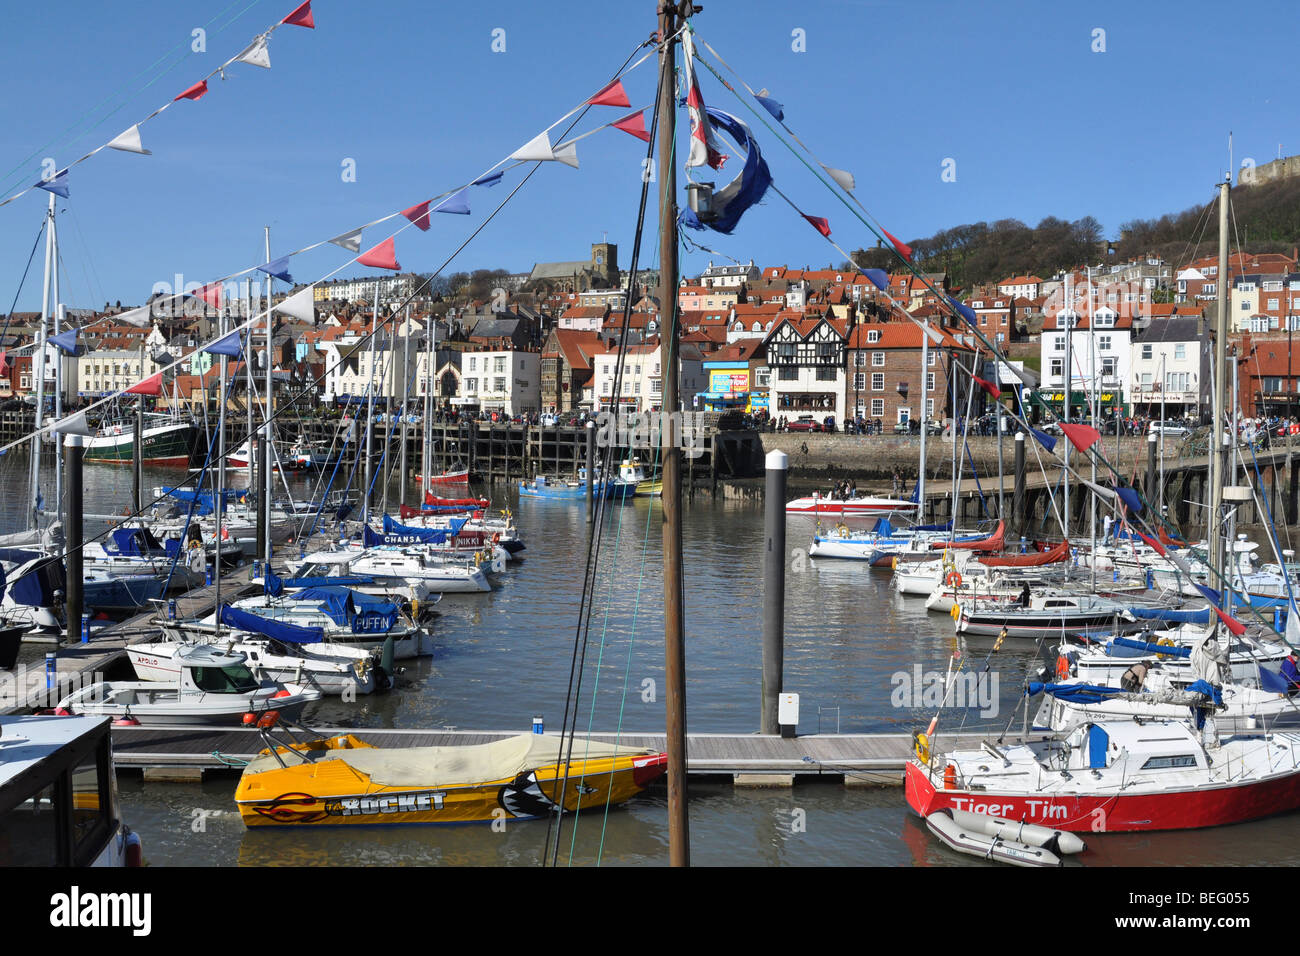 Boats in Scarborough bay, North Yorkshire UK Stock Photo